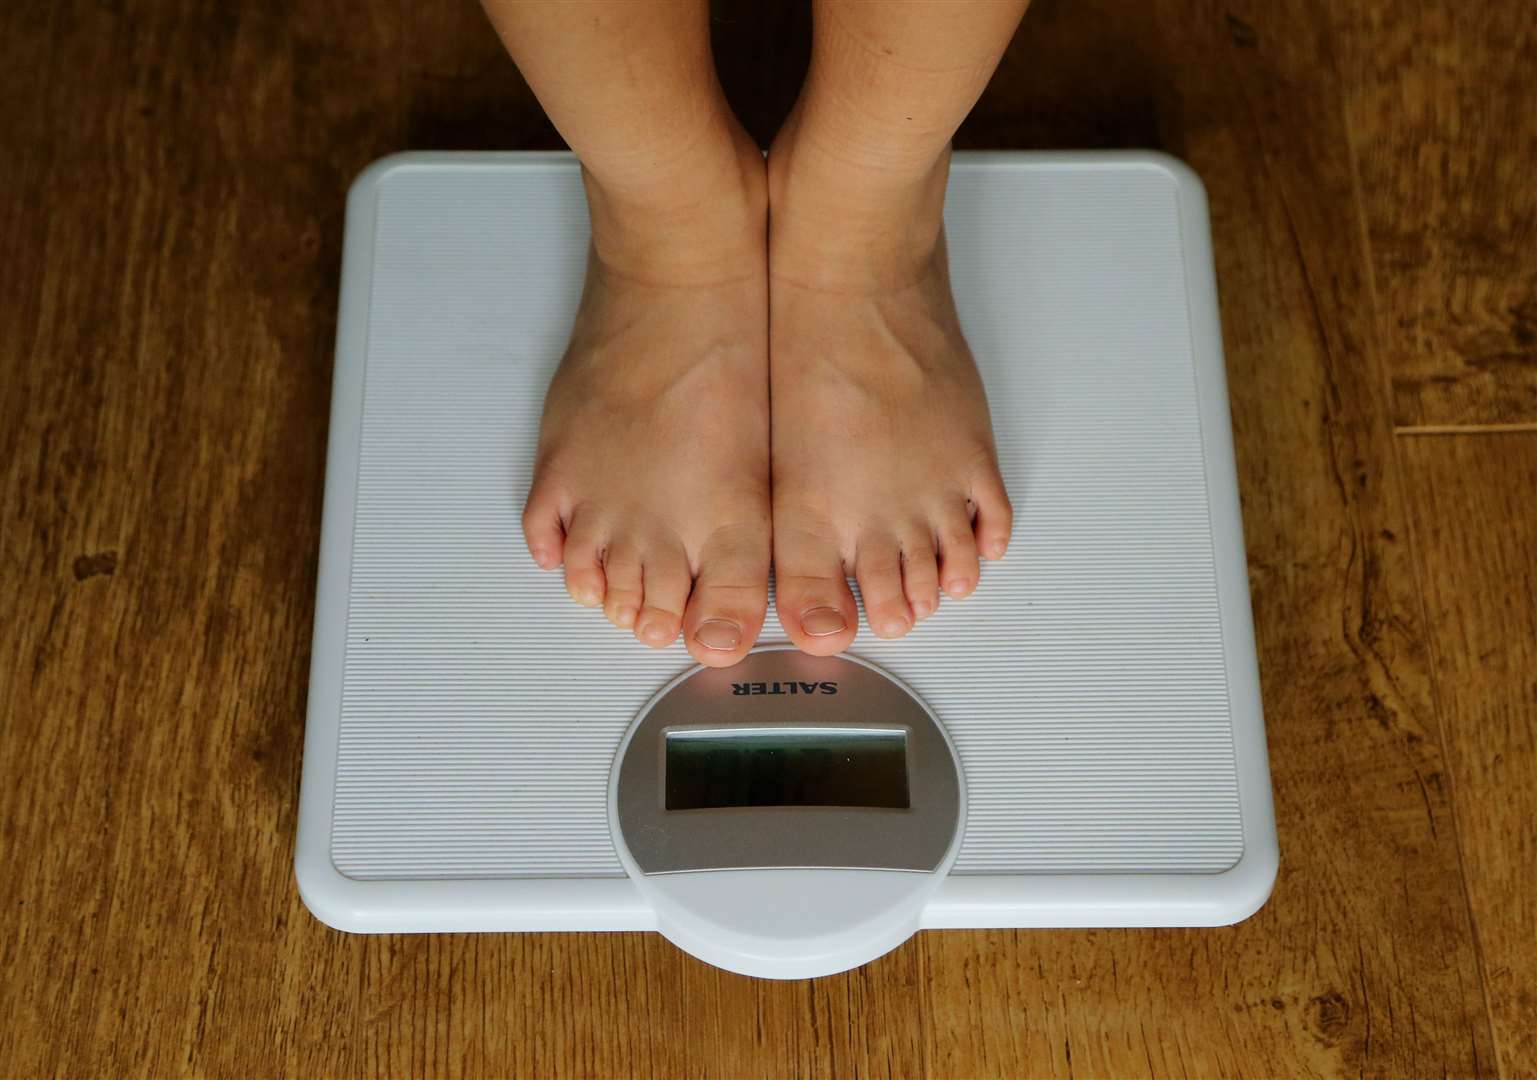 Two thirds of all adults are overweight